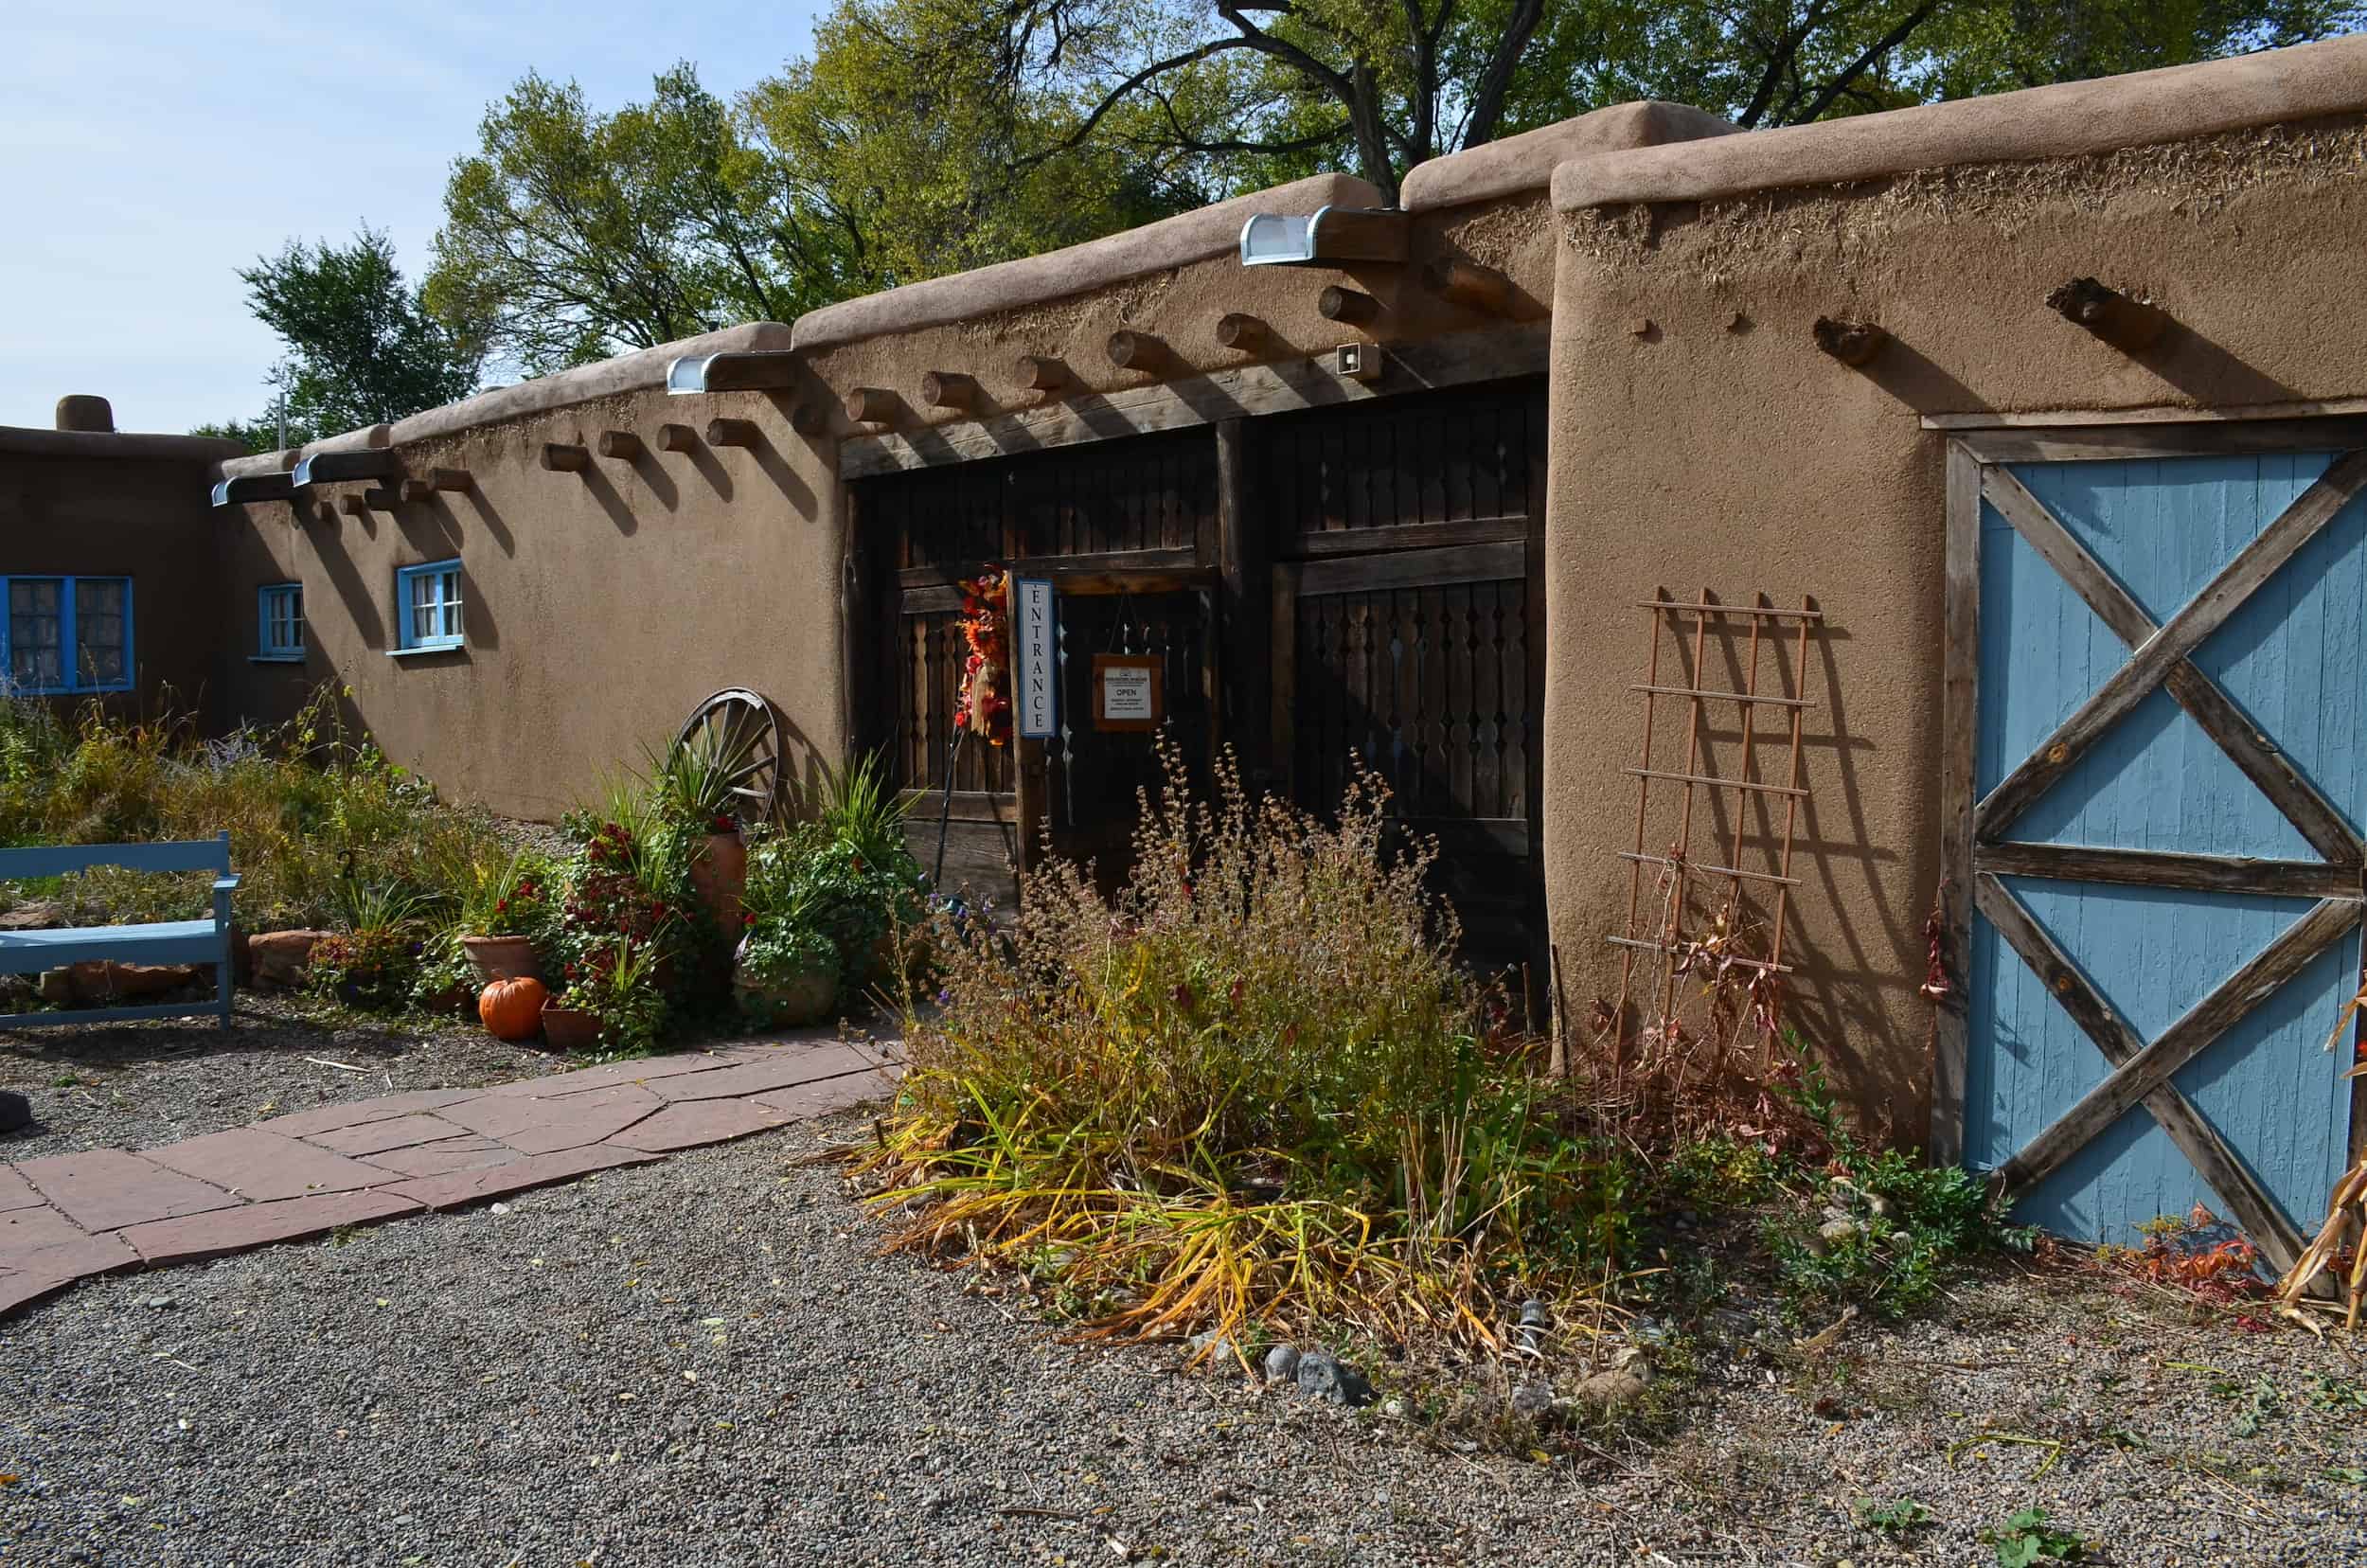 Ernest L. Blumenschein Home and Museum in the Downtown Taos Historic District of Taos, New Mexico